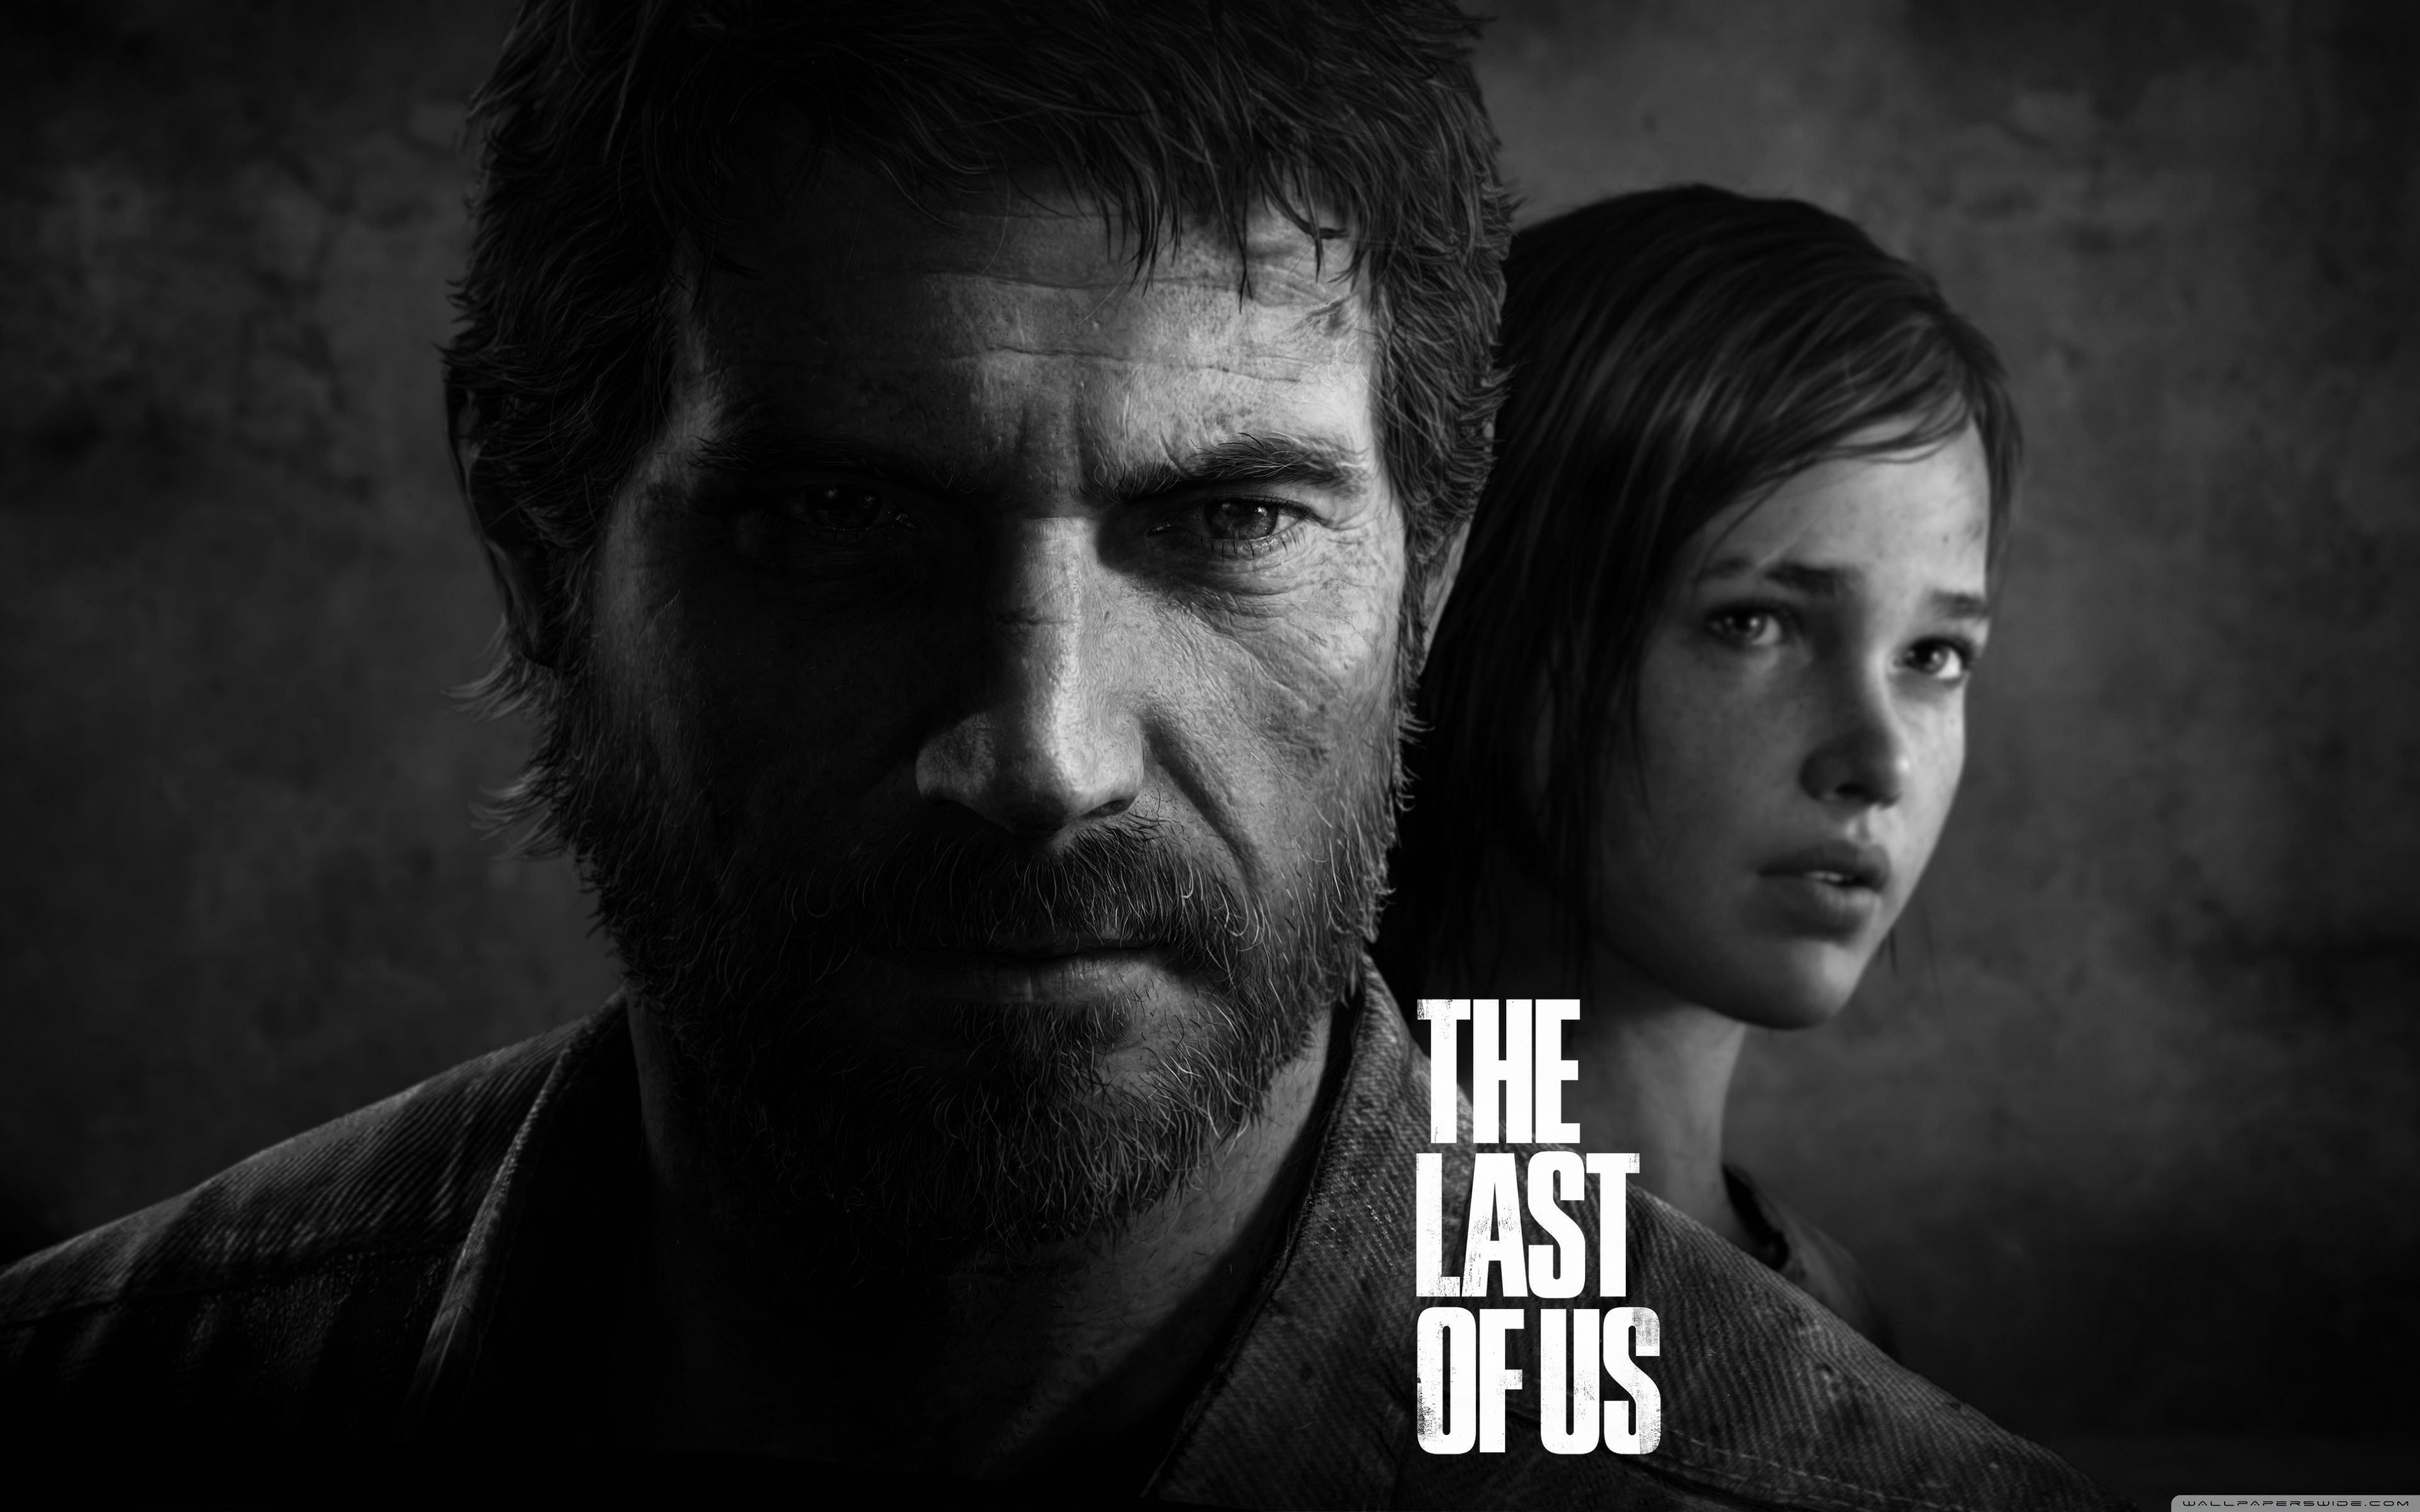 The Last of Us Wallpaper Free The Last of Us Background